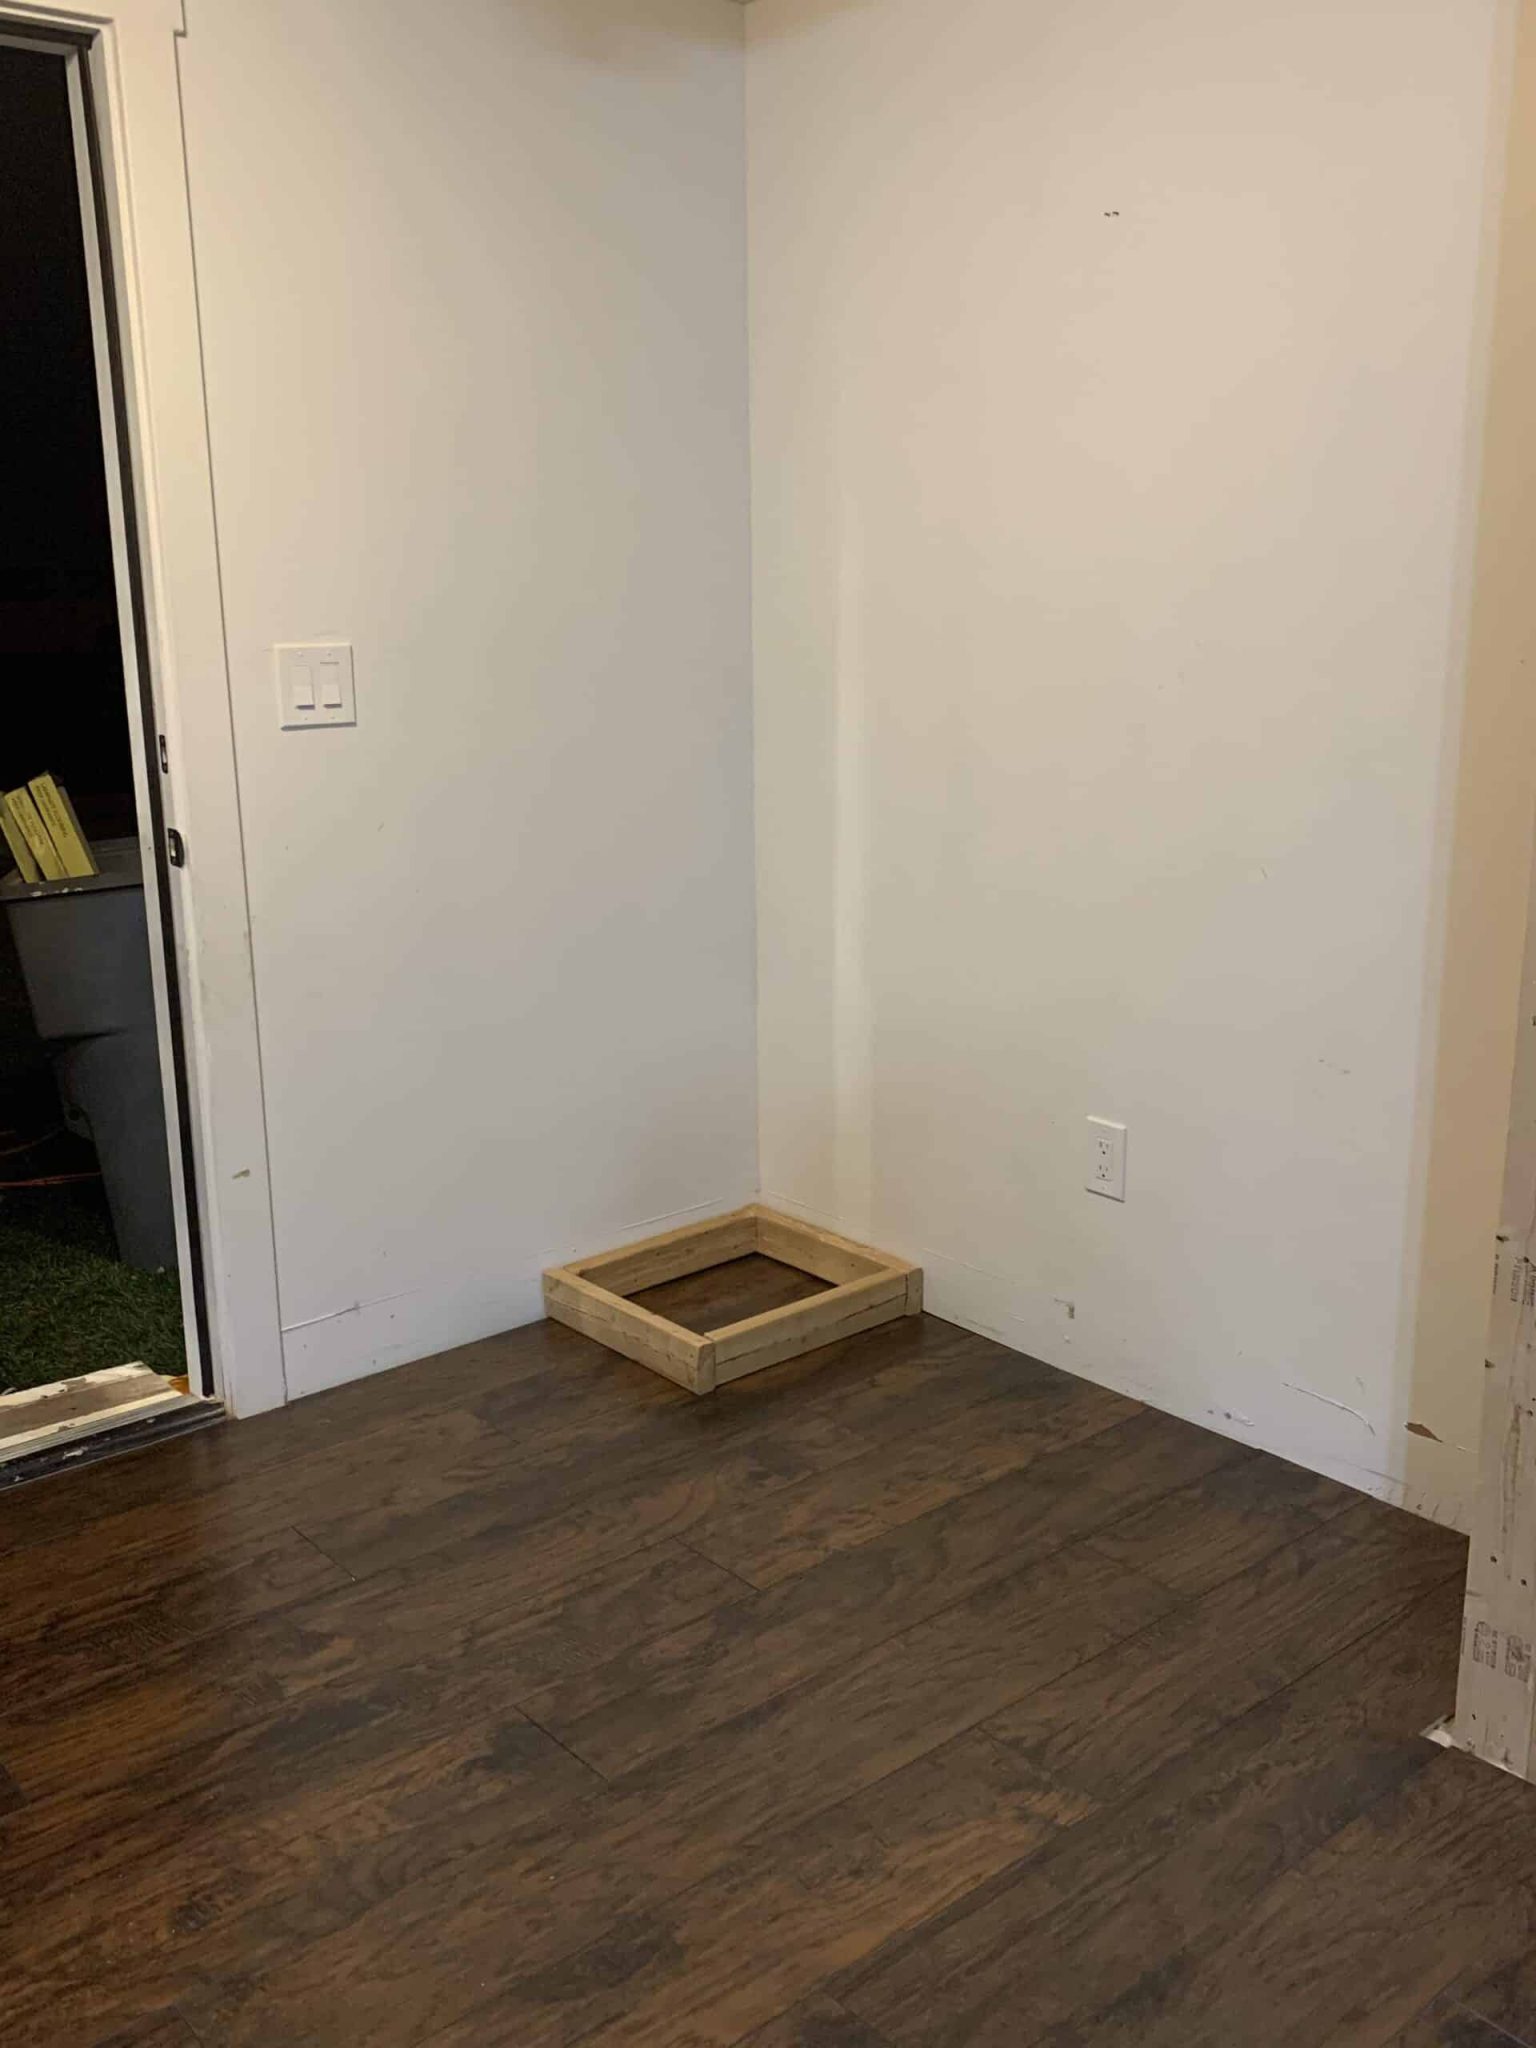 Wooden square on the ground in an entryway